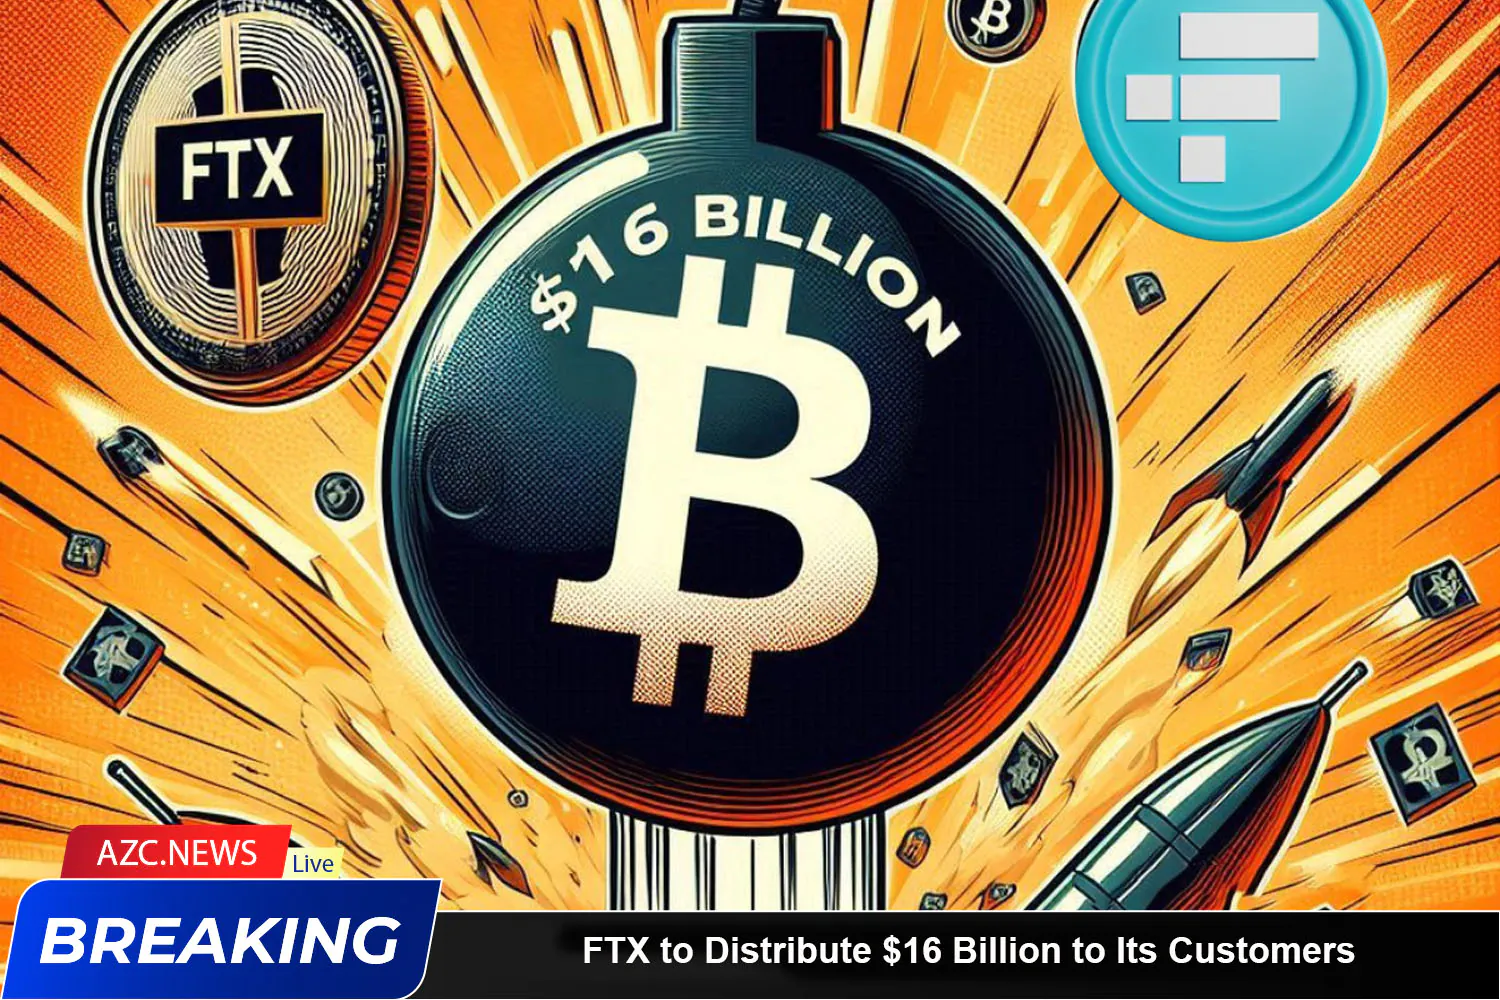 Ftx To Distribute $16 Billion To Its Customers